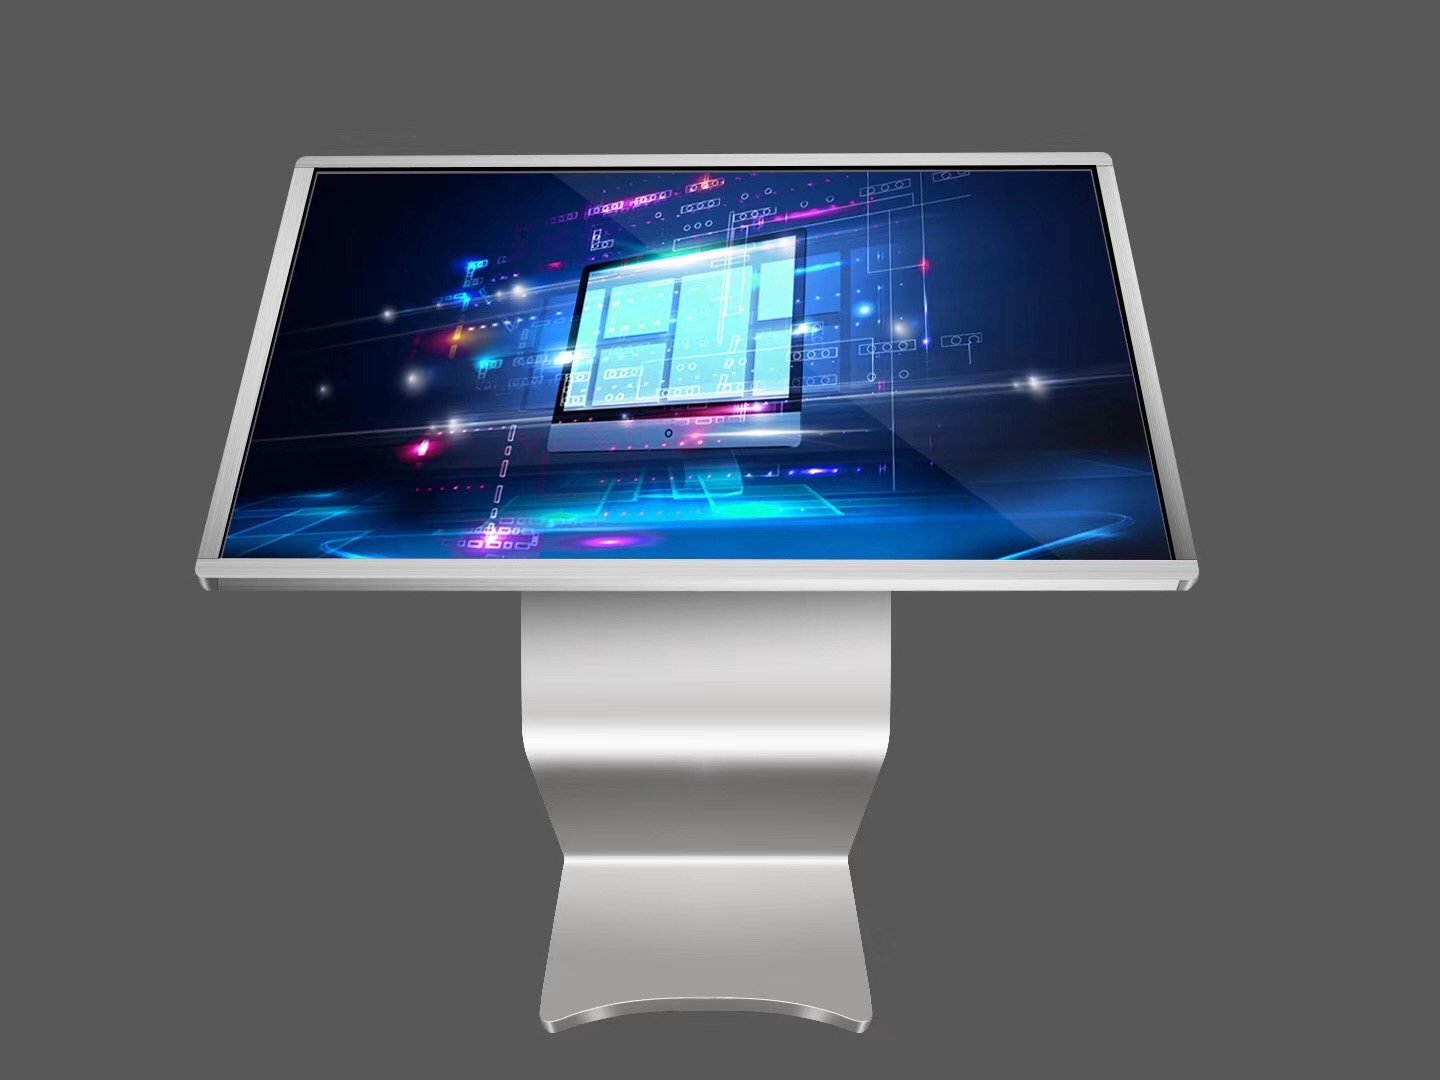 What are the main functions of the self-service touch screen kiosk /query machine?